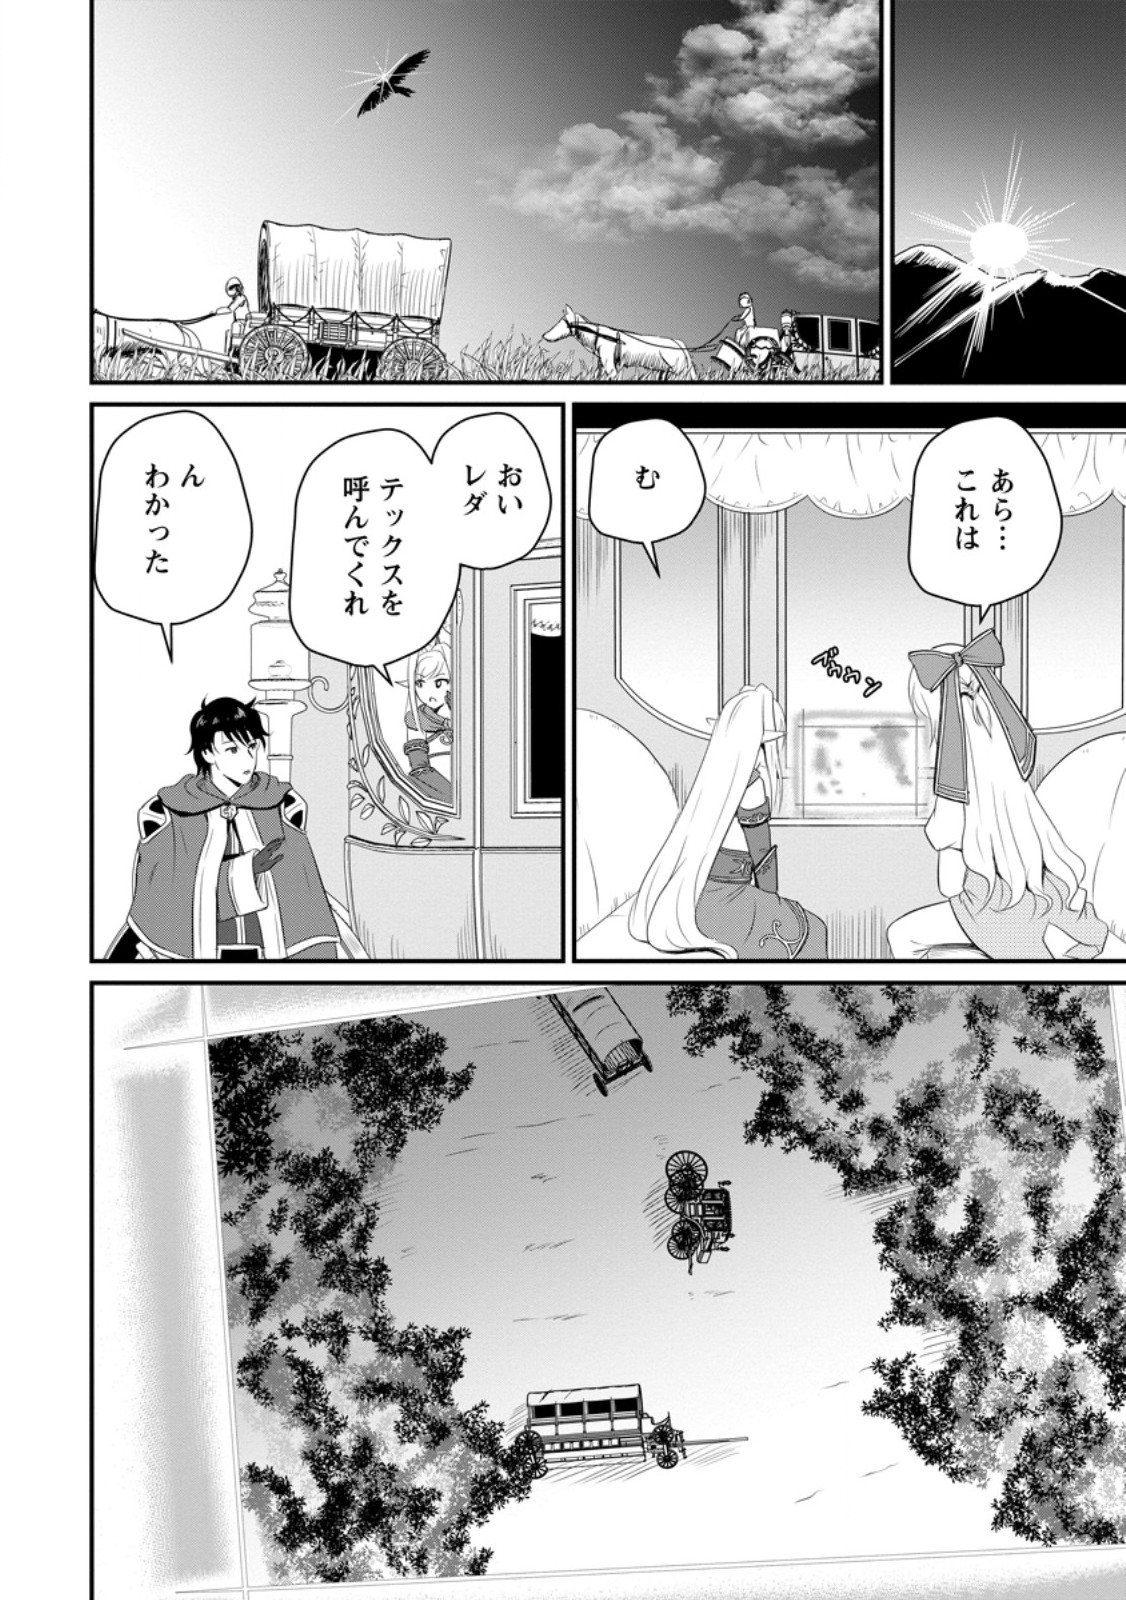 The Frontier Life of The Low-Class Ossan Healer And The Lovery Girl - Chapter 48.1 - Page 10